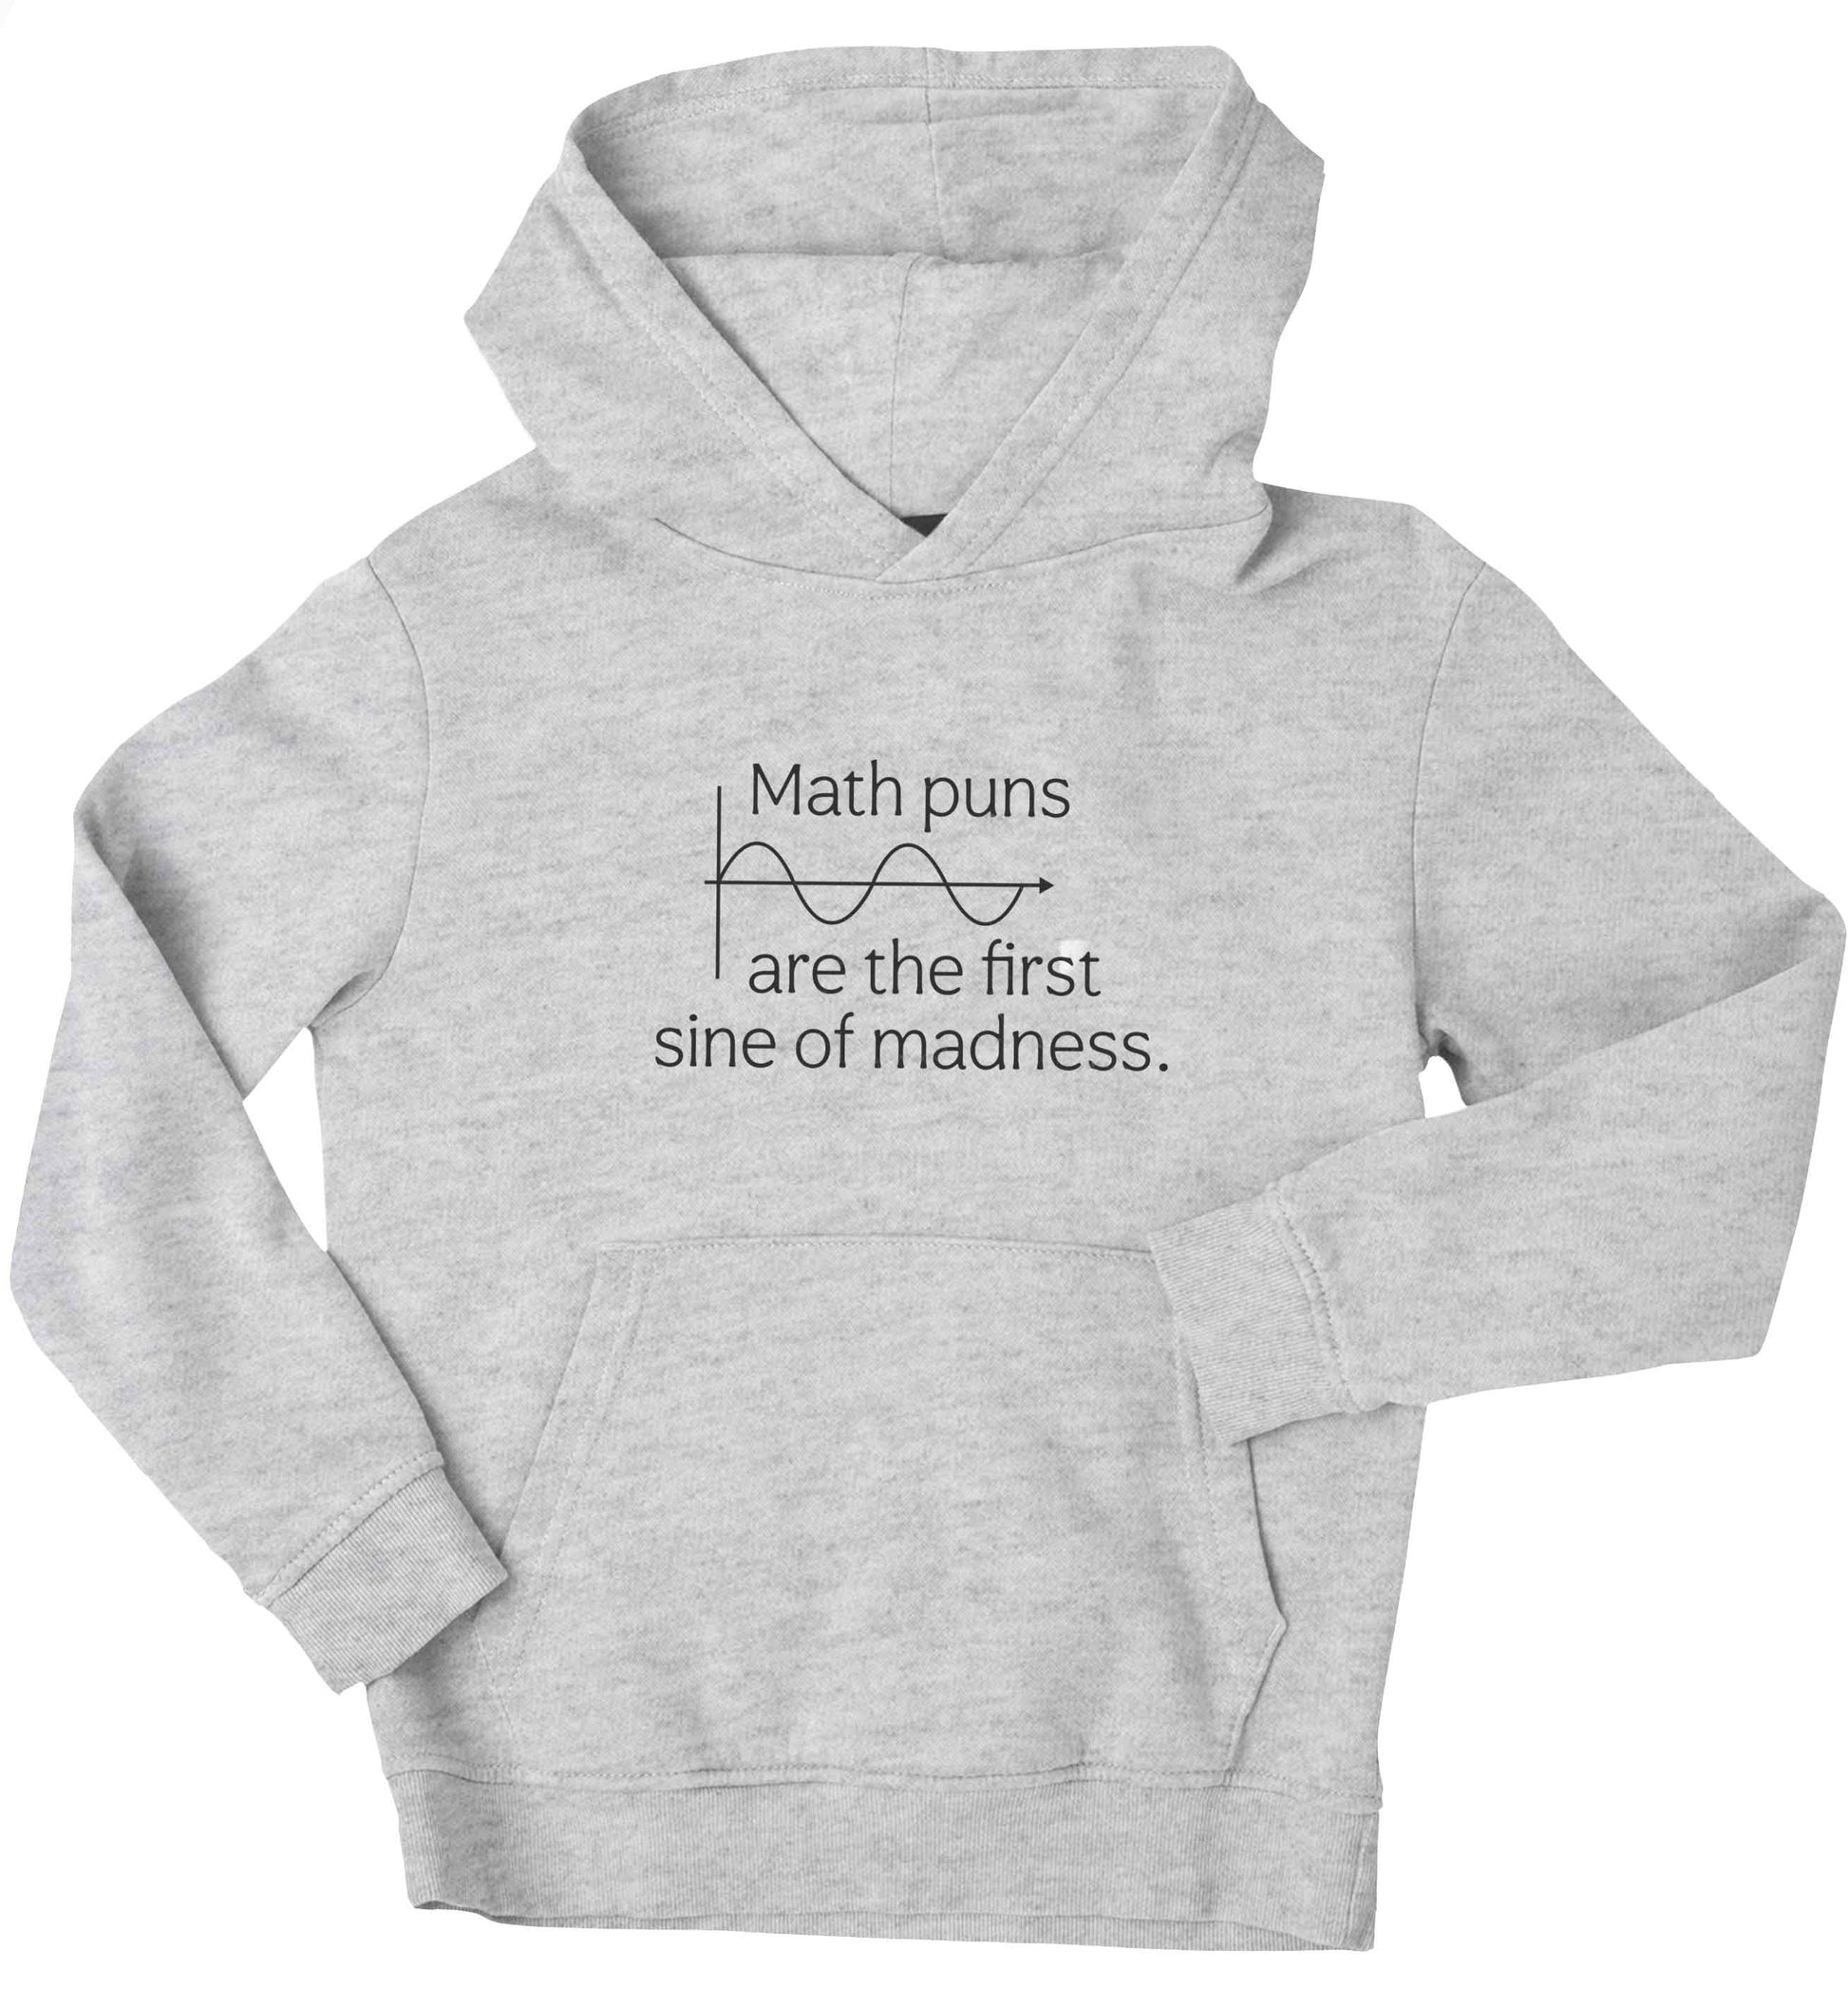 Math puns are the first sine of madness children's grey hoodie 12-13 Years